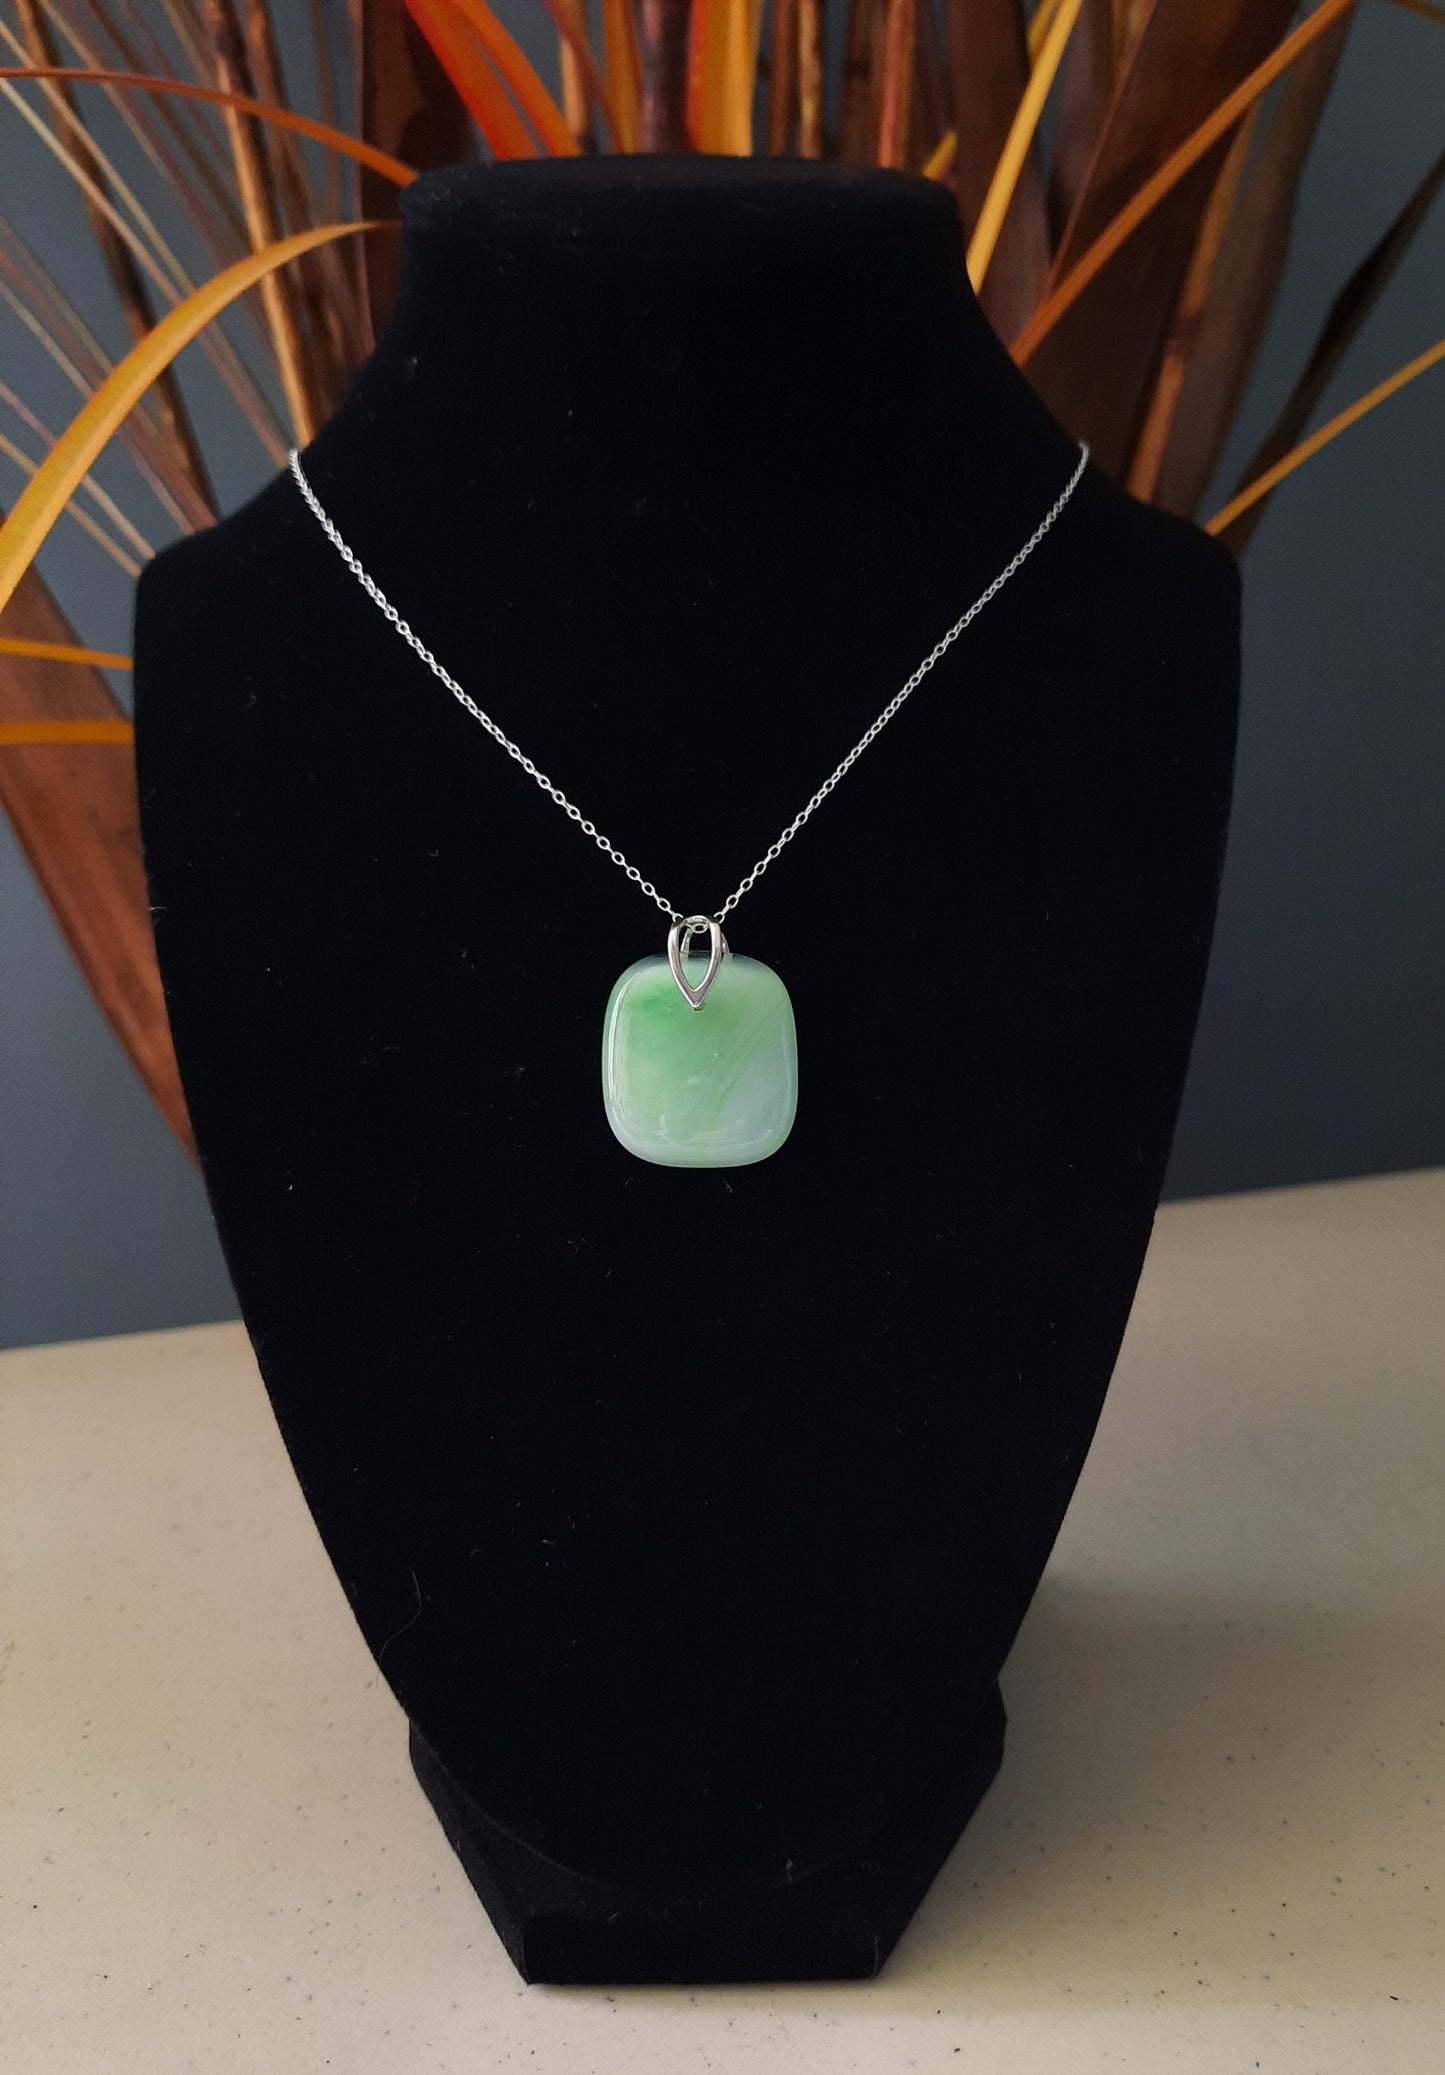 Fused Glass Pendant on .925 Sterling Silver